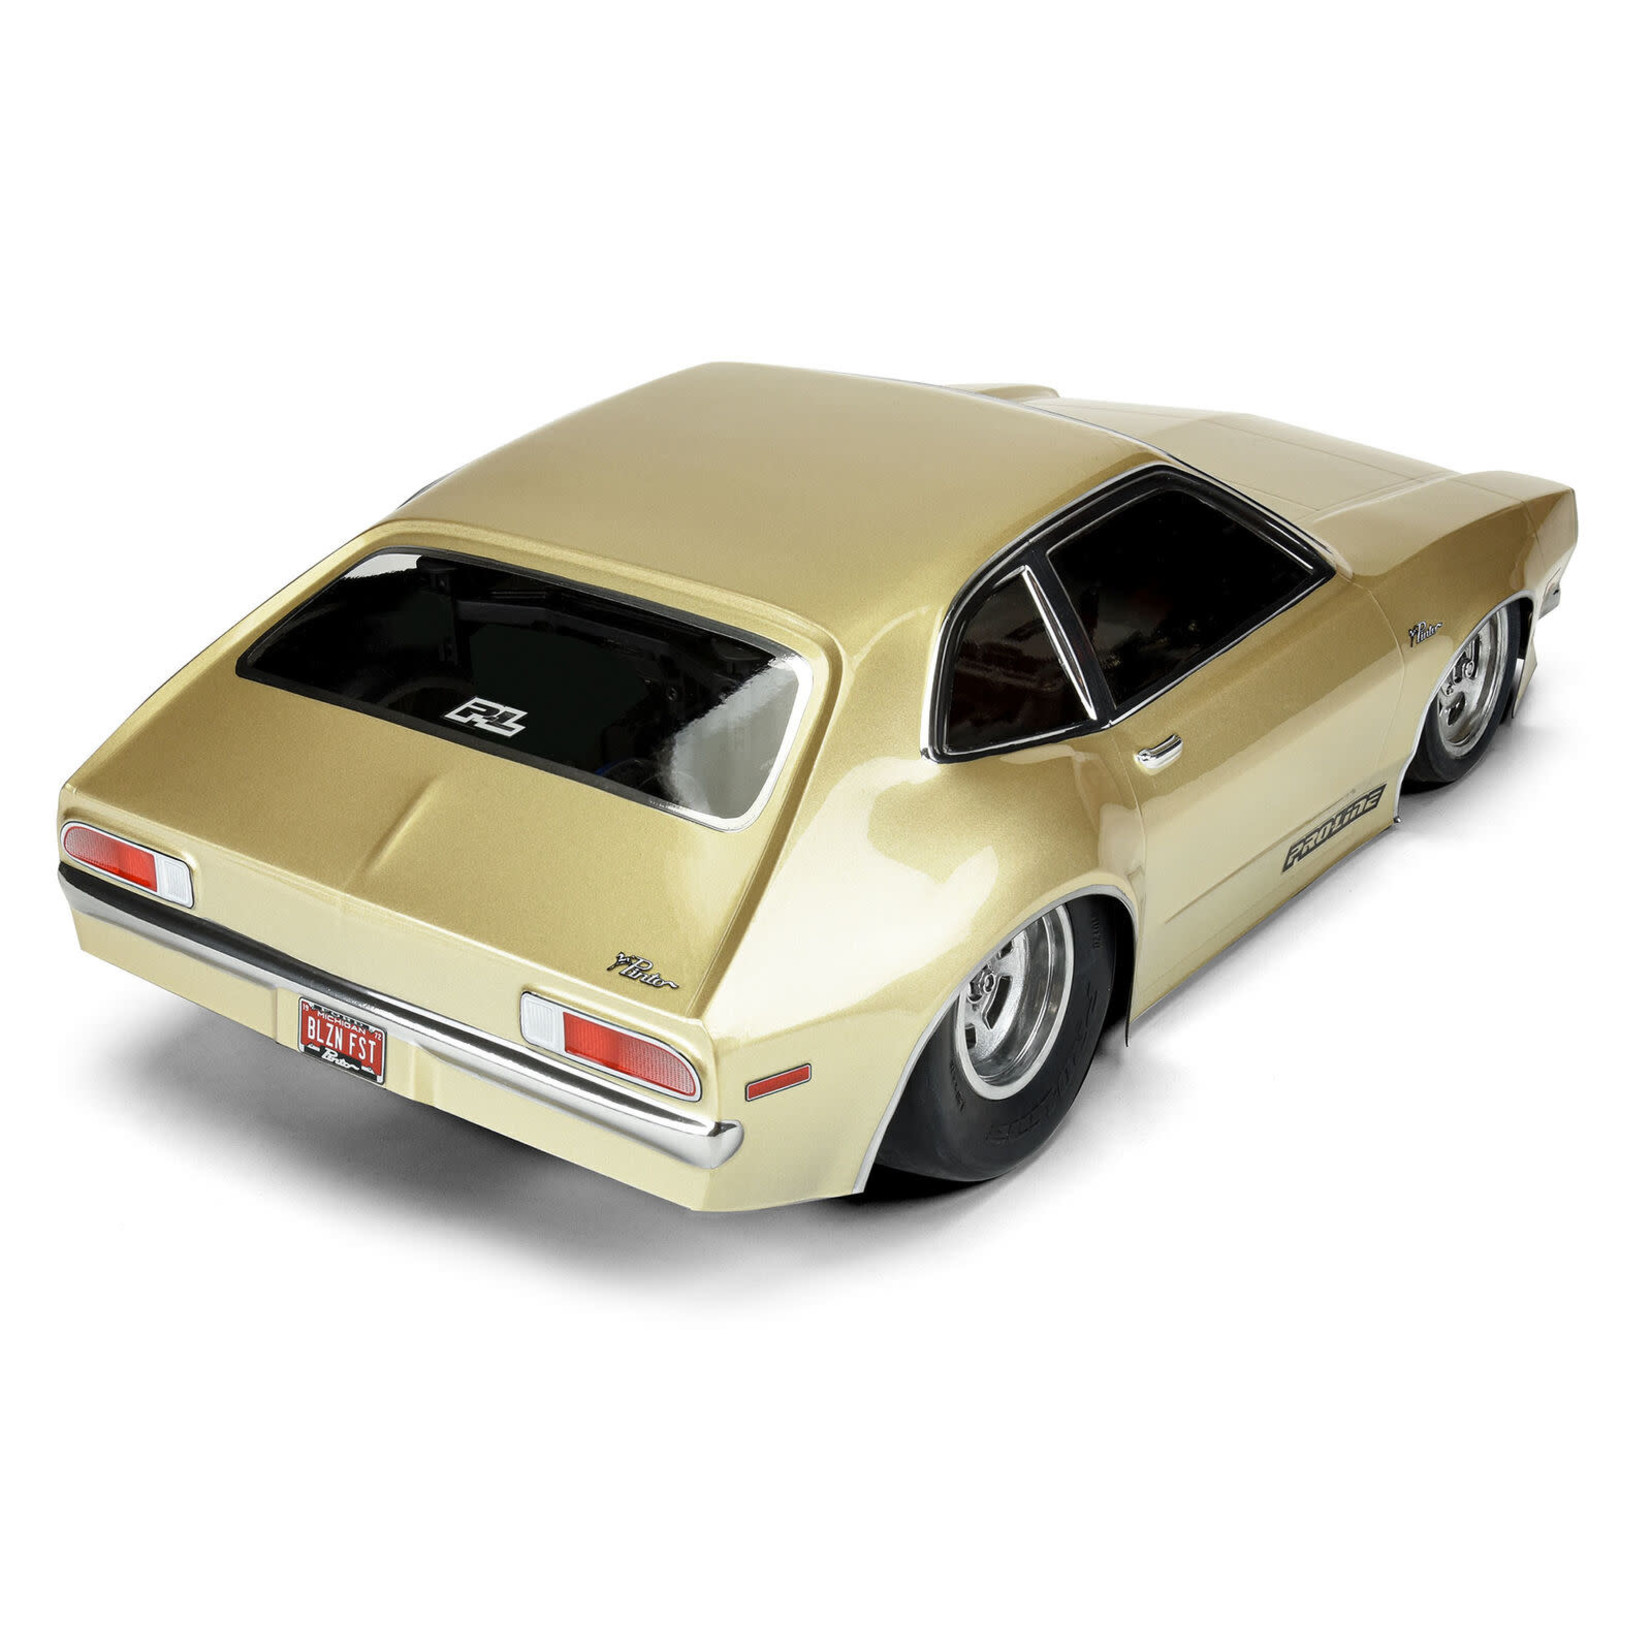 Pro-Line Pro-Line 1972 Ford Pinto Short Course No Prep Drag Racing Body (Clear) #3572-00